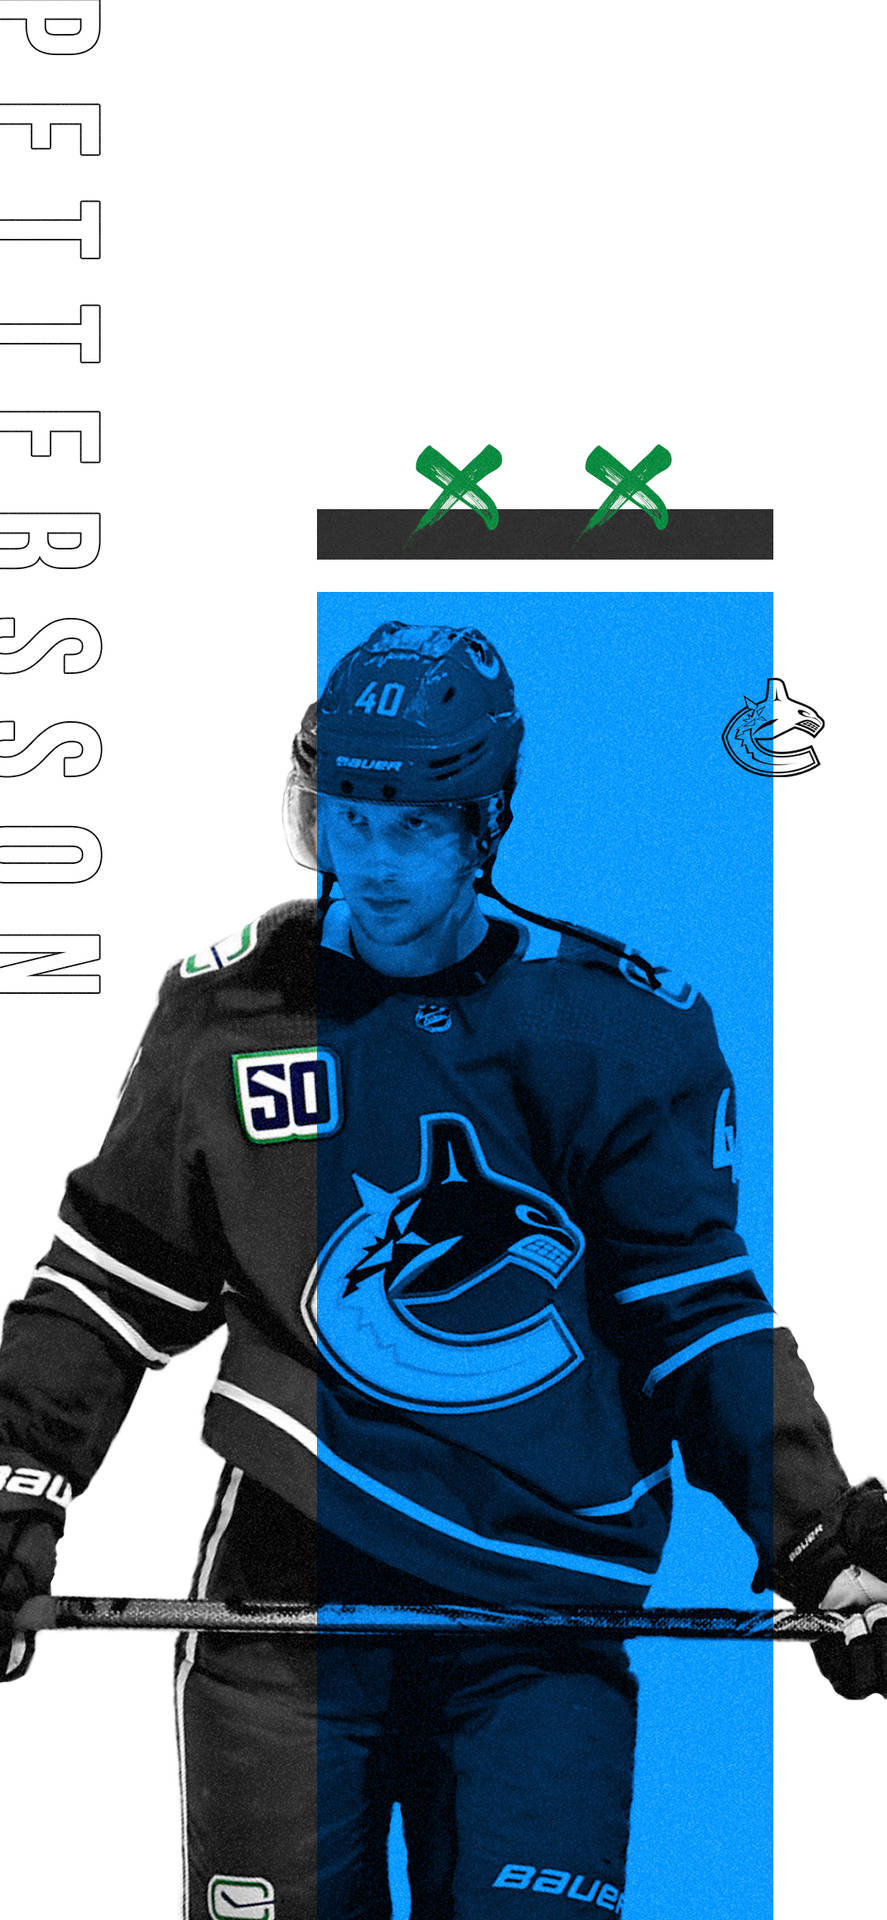 Canadian Nhl Player Elias Pettersson Blue And White Poster Background